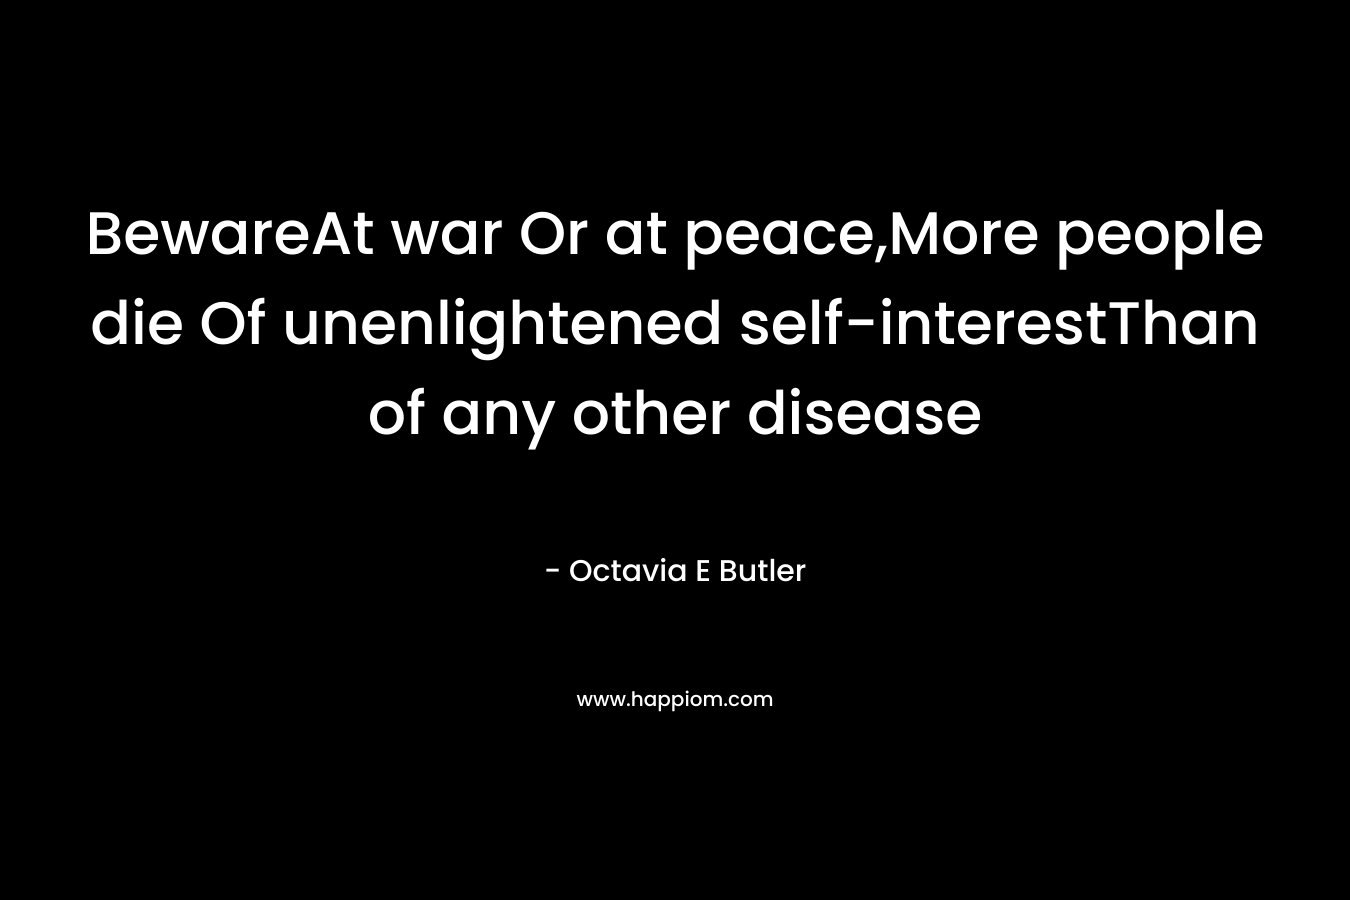 BewareAt war Or at peace,More people die Of unenlightened self-interestThan of any other disease